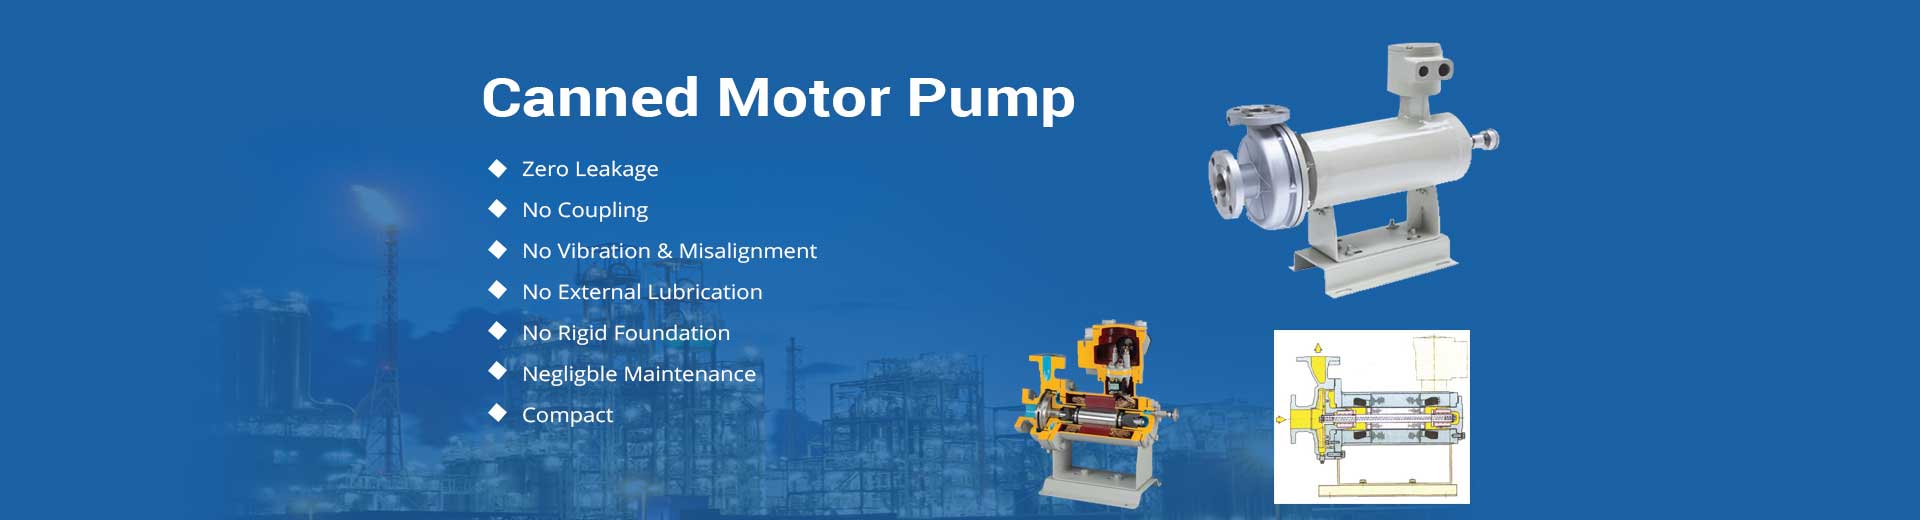 Hermetic Pumps Manufacturing and Supplying in india